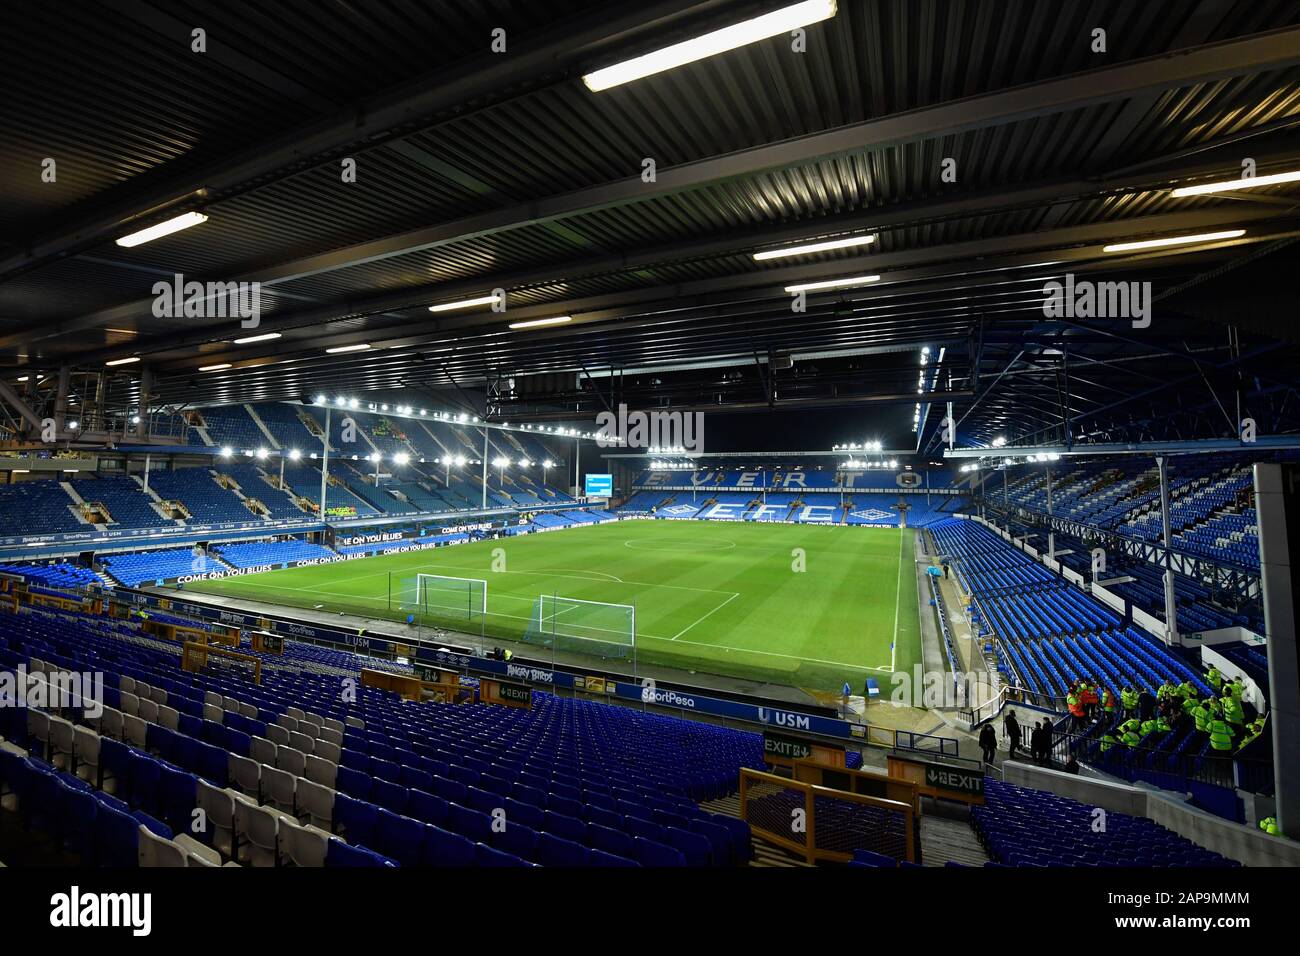 21st January 2020, Goodison Park, Liverpool, England; Premier League, Everton v Newcastle United : A general view of Goodison Park under the lights, the home of Everton Stock Photo